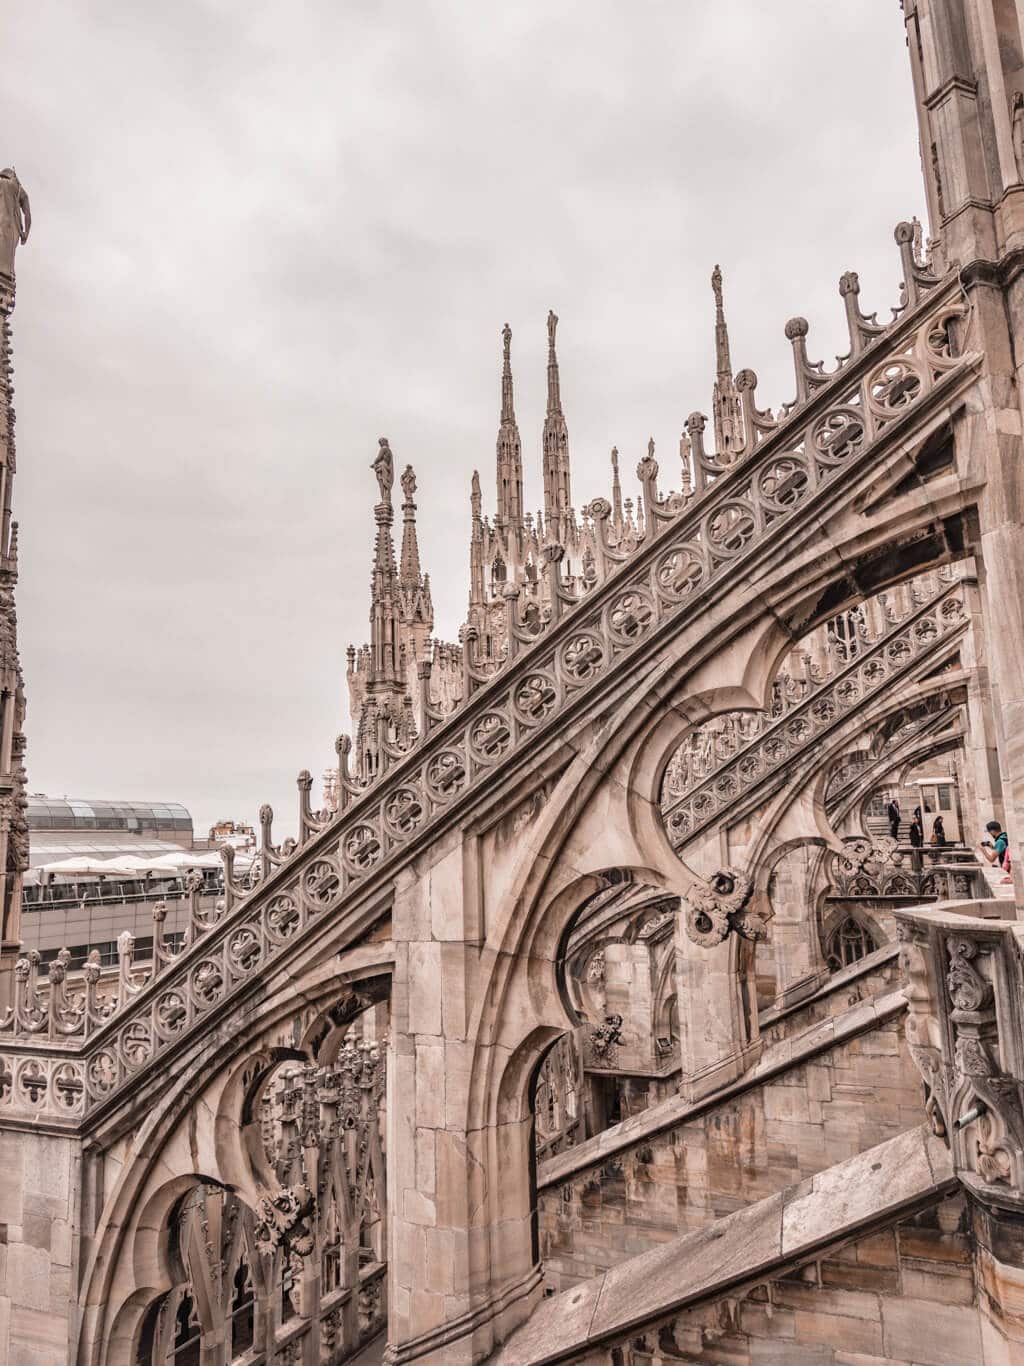 Things to do in Milan - tips for shopping, food, coffee places and much more!